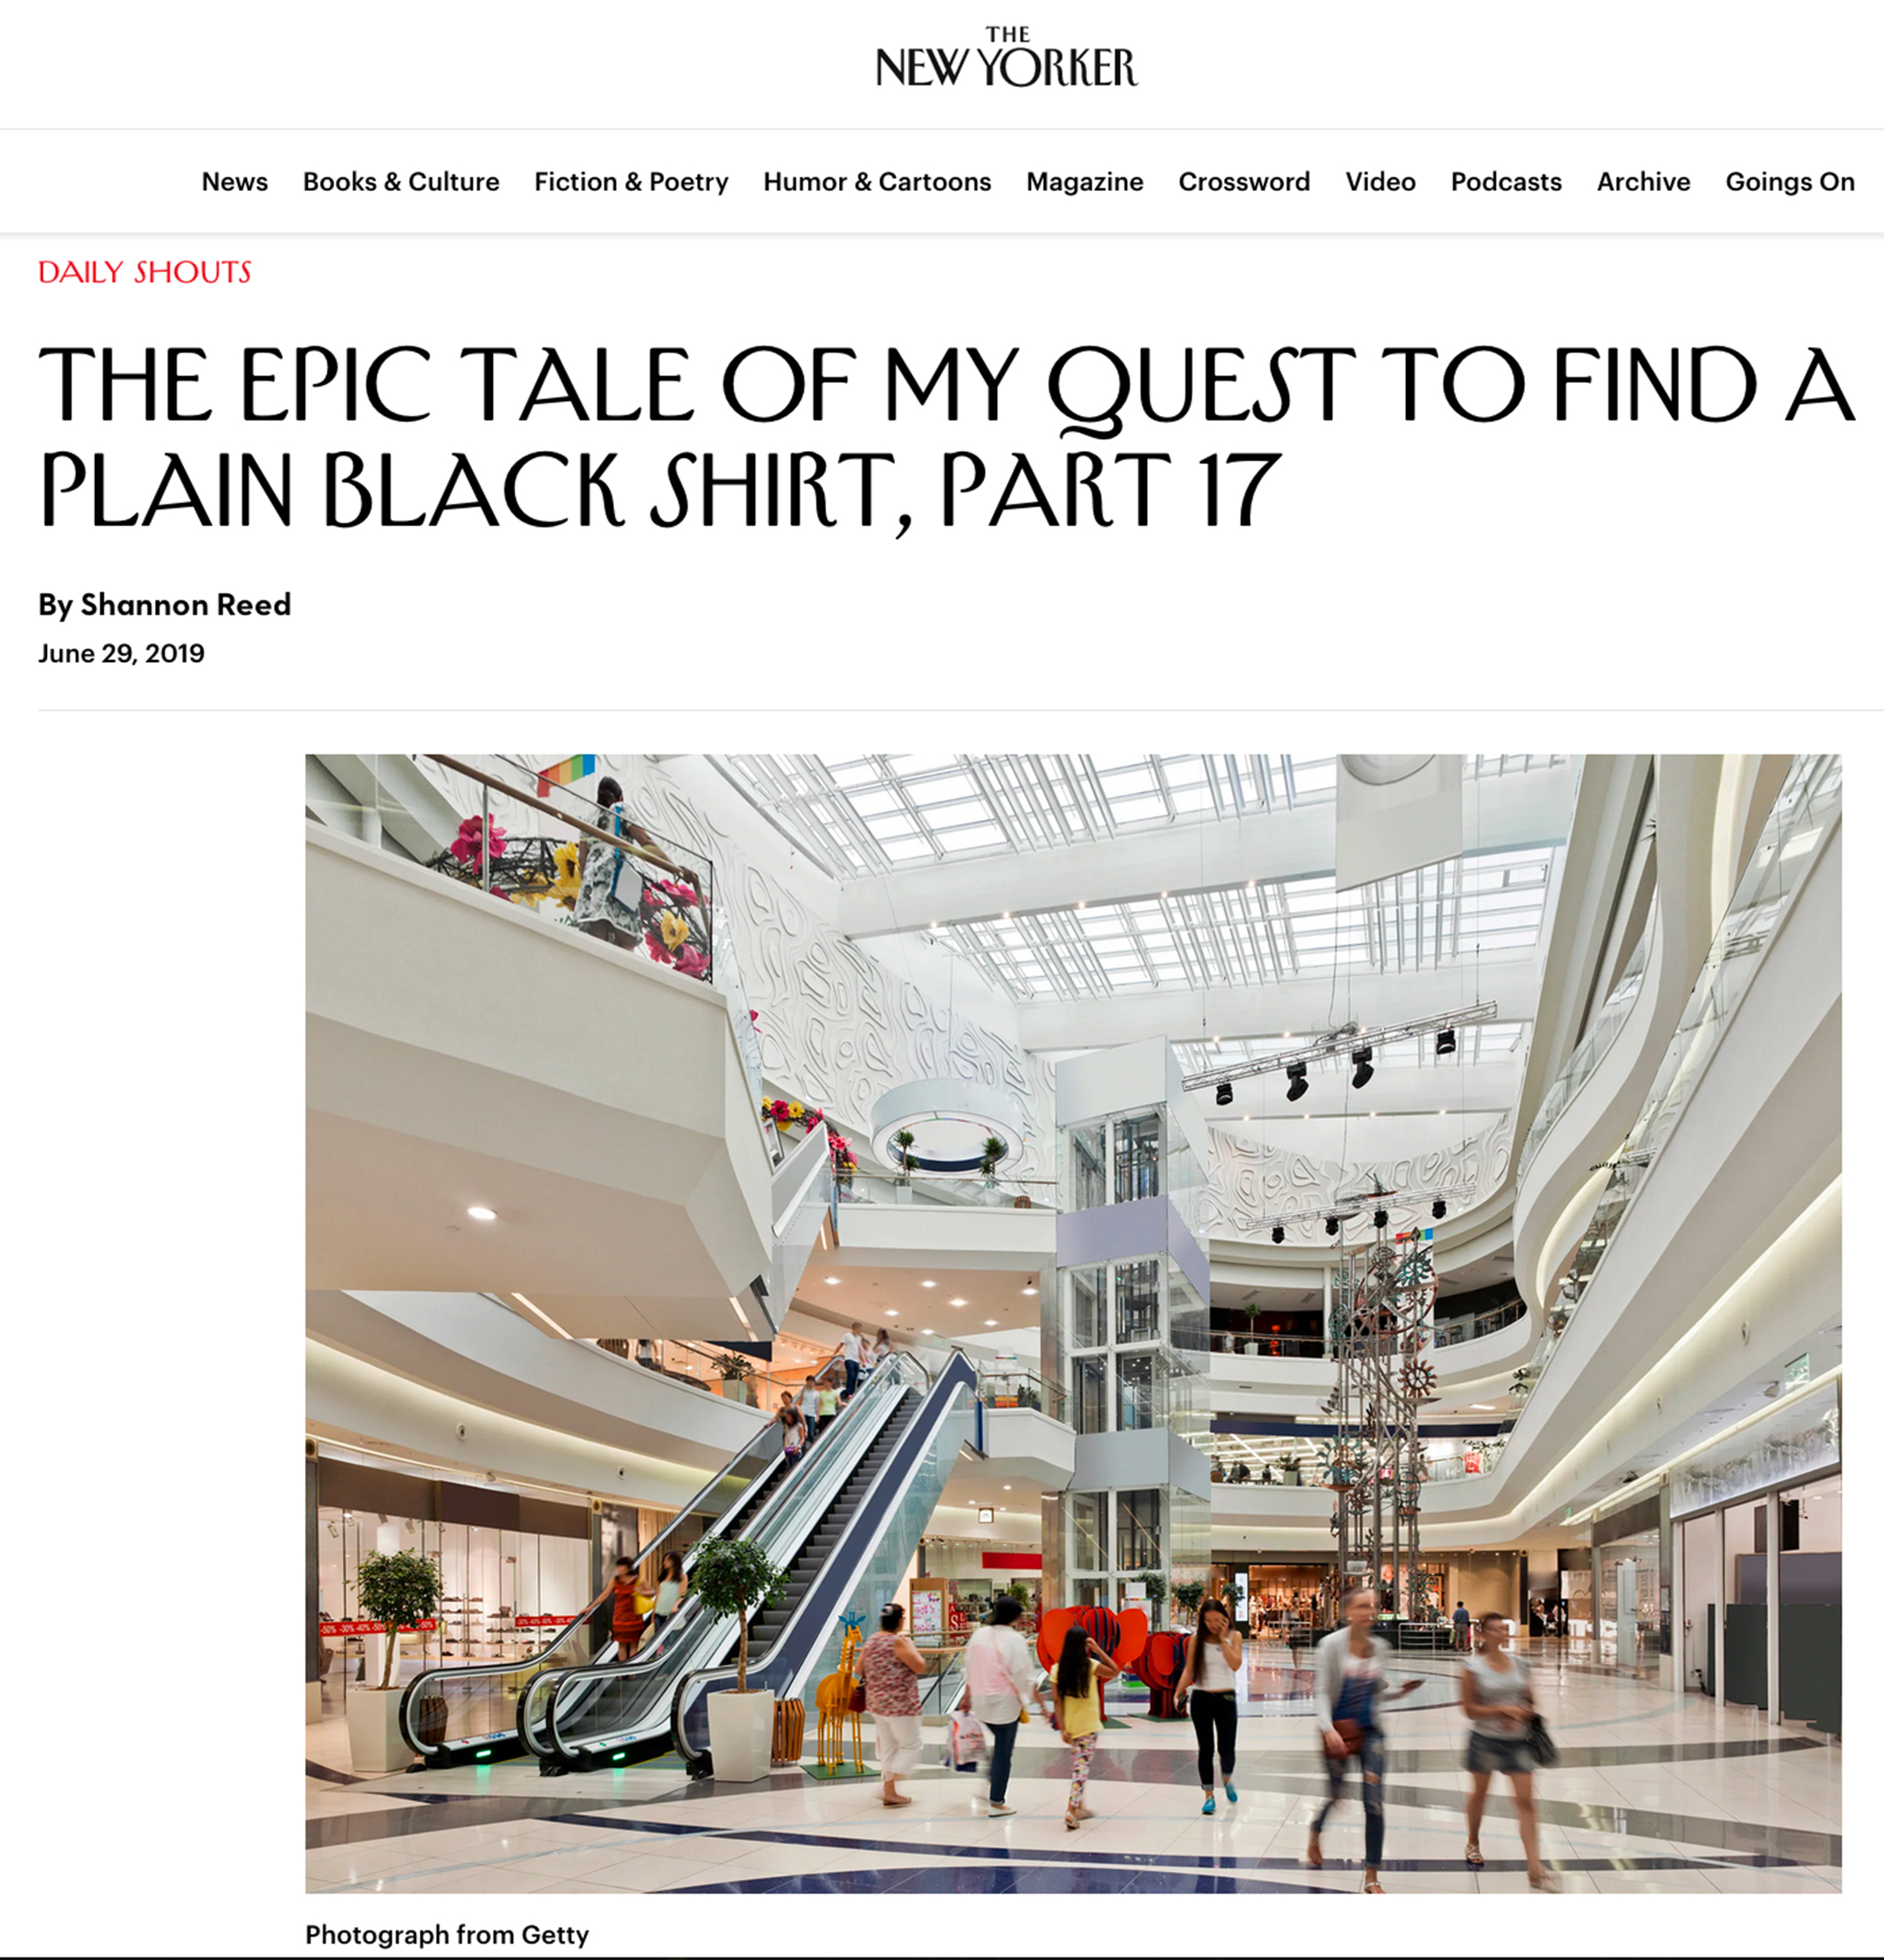 screenshot of the article The Epic Tale of My Quest to Find a Plain Black Shirt, Part 17 published on the New Yorker website